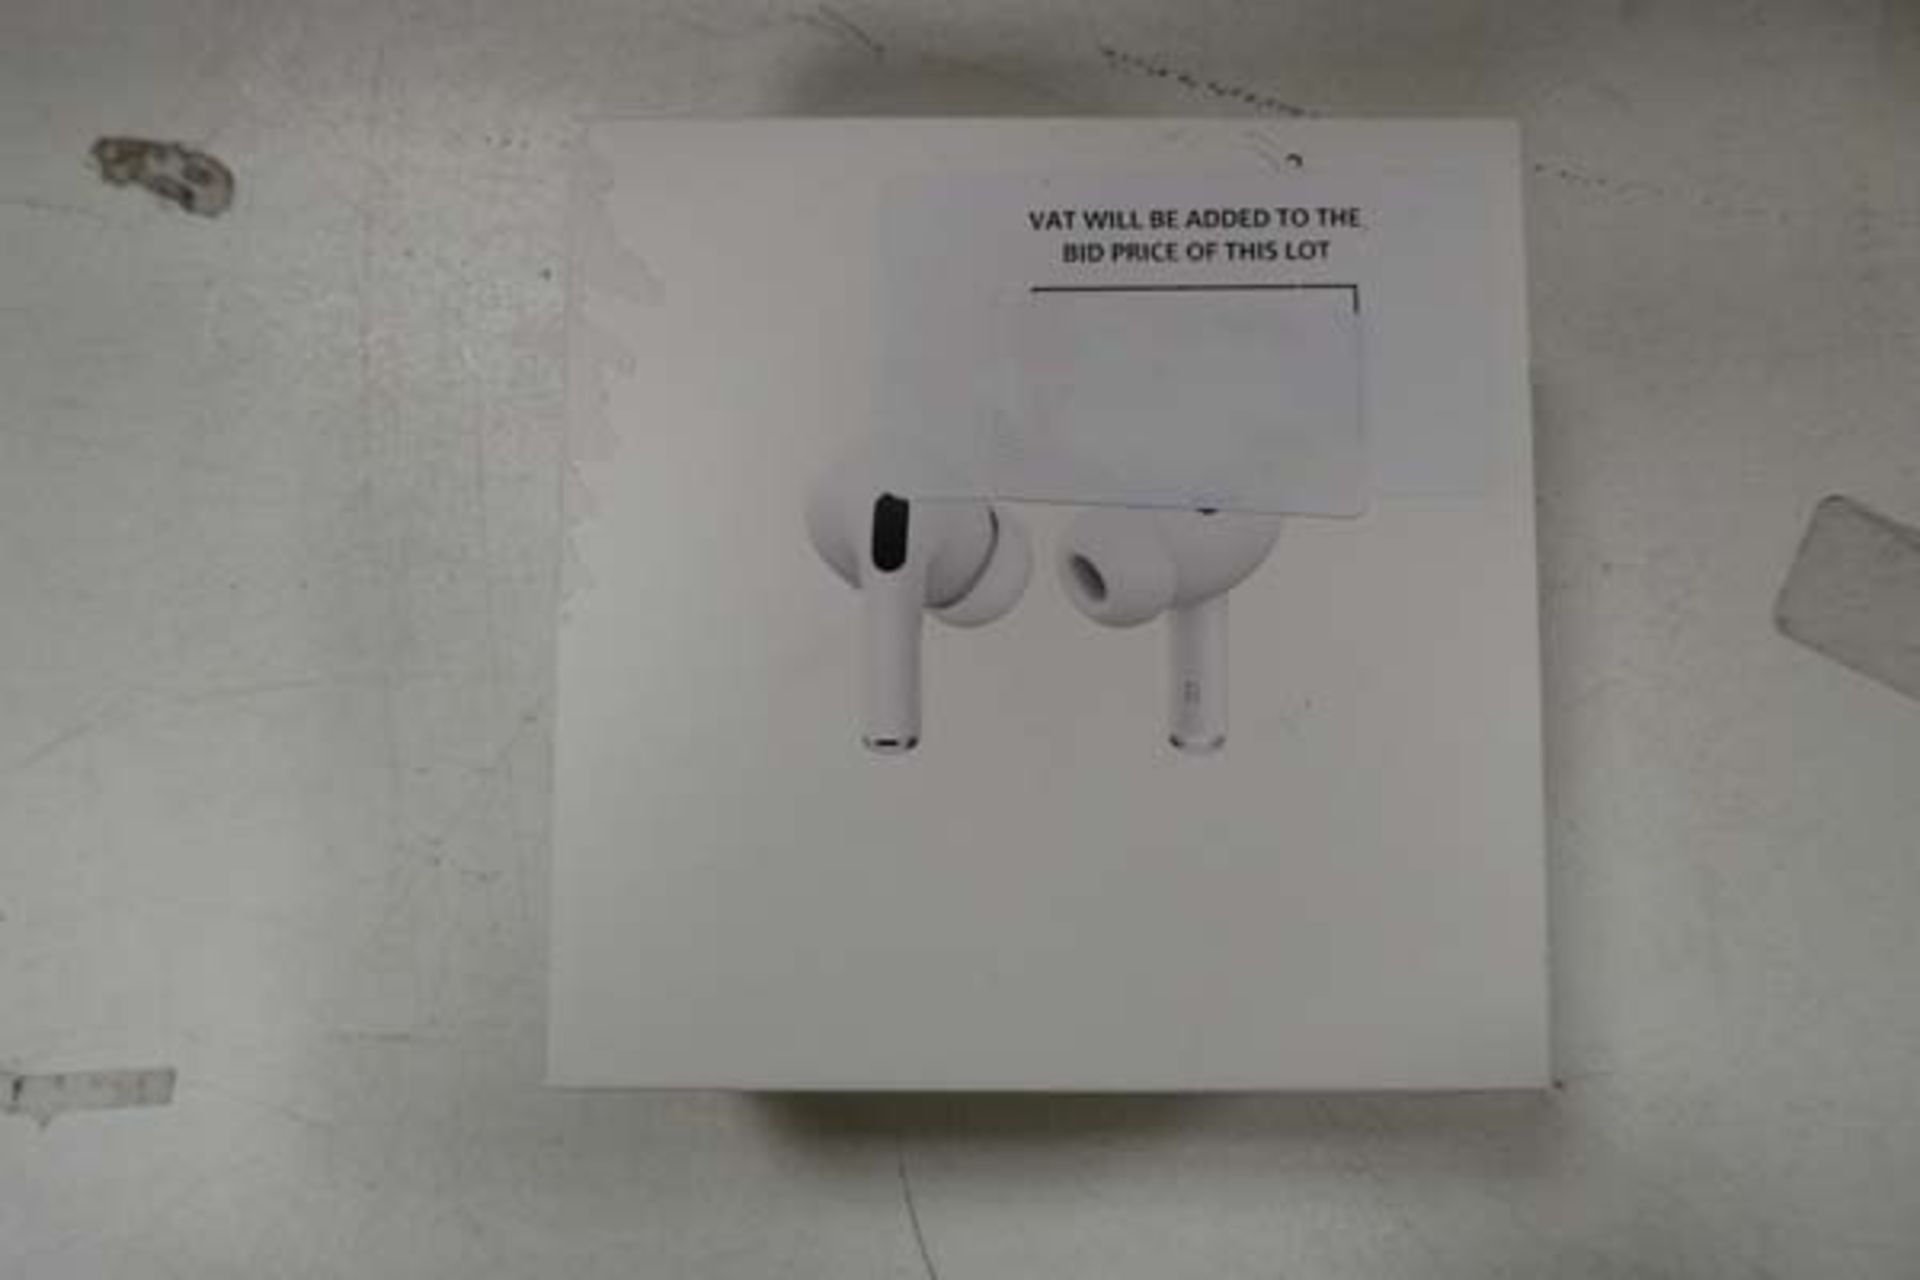 2022 Pair of Apple air pods pro with wireless charging case and box - Image 2 of 2